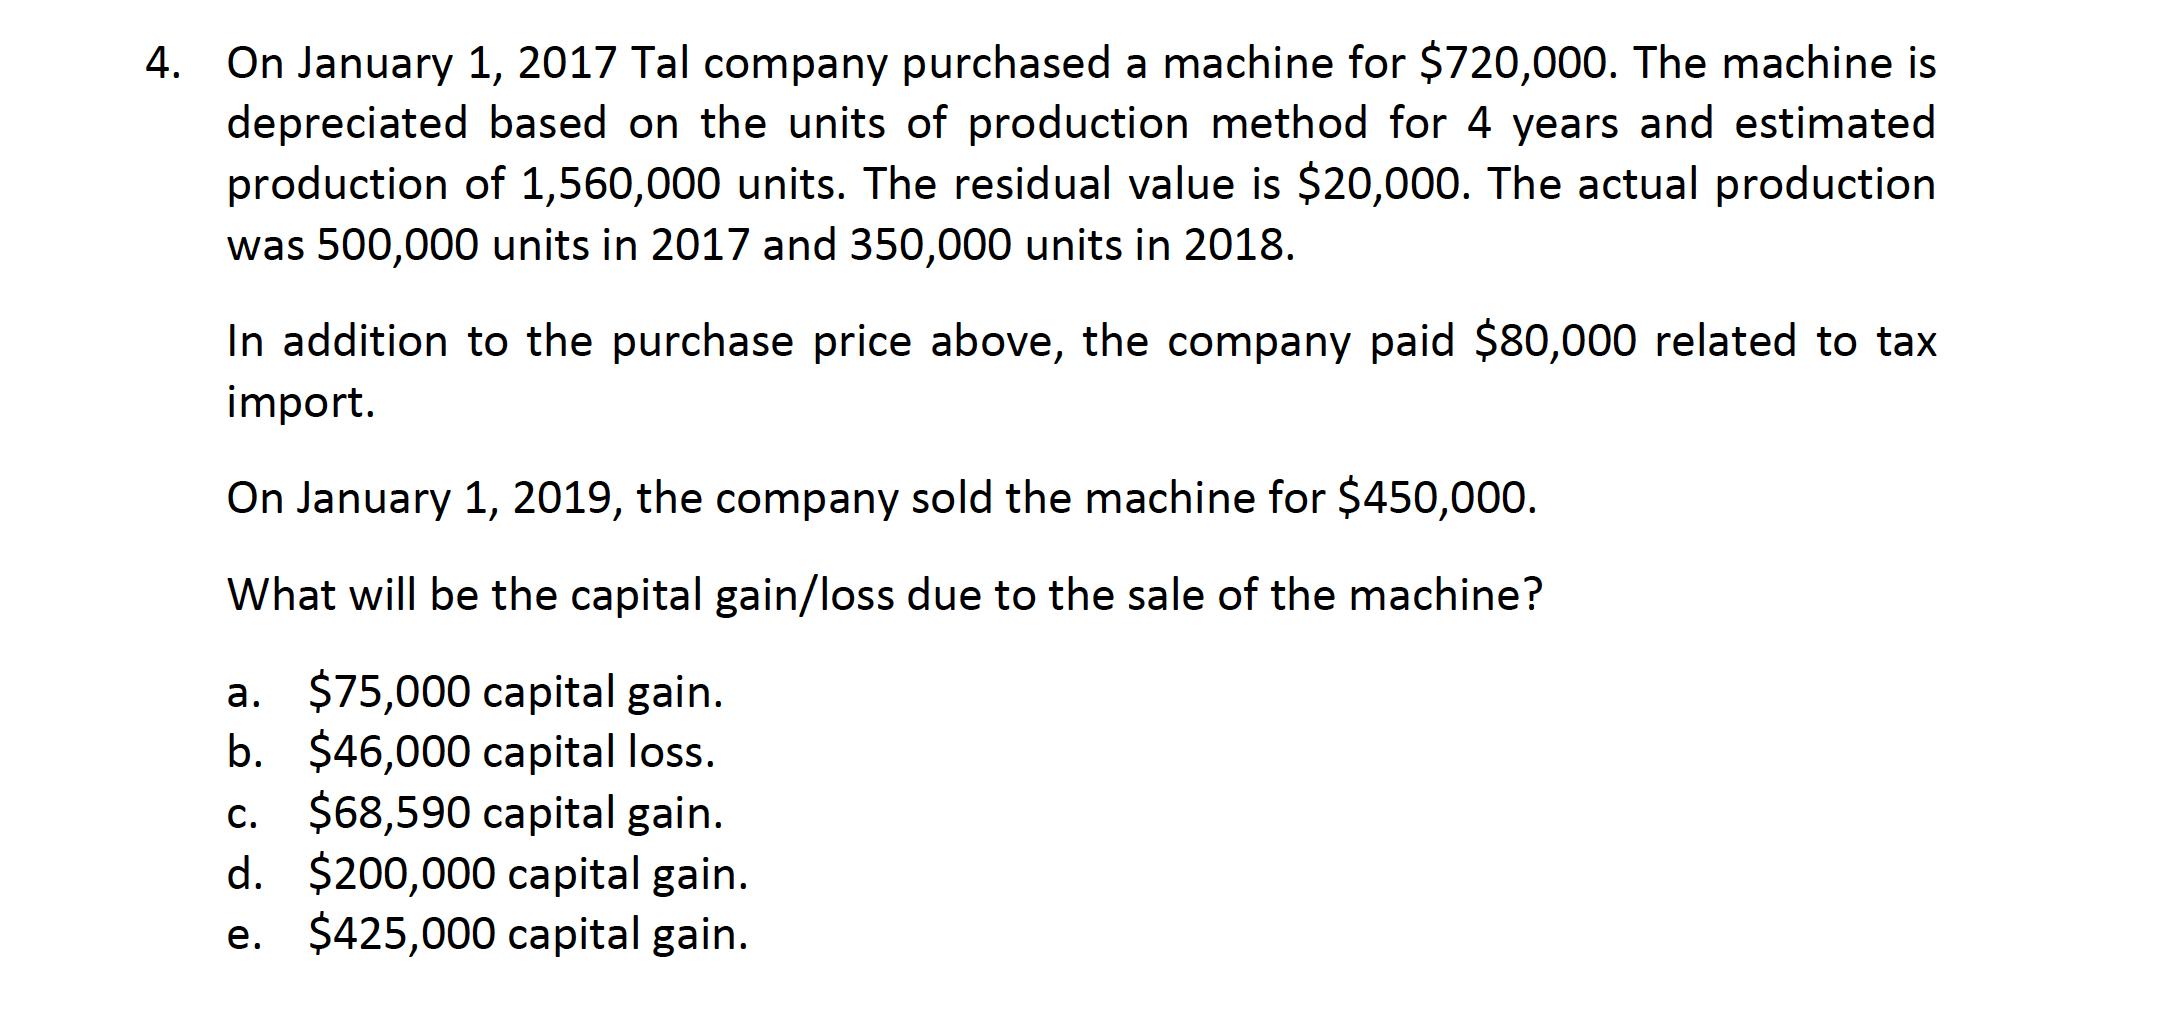 4. On January 1, 2017 Tal company purchased a machine for $720,000. The machine is depreciated based on the